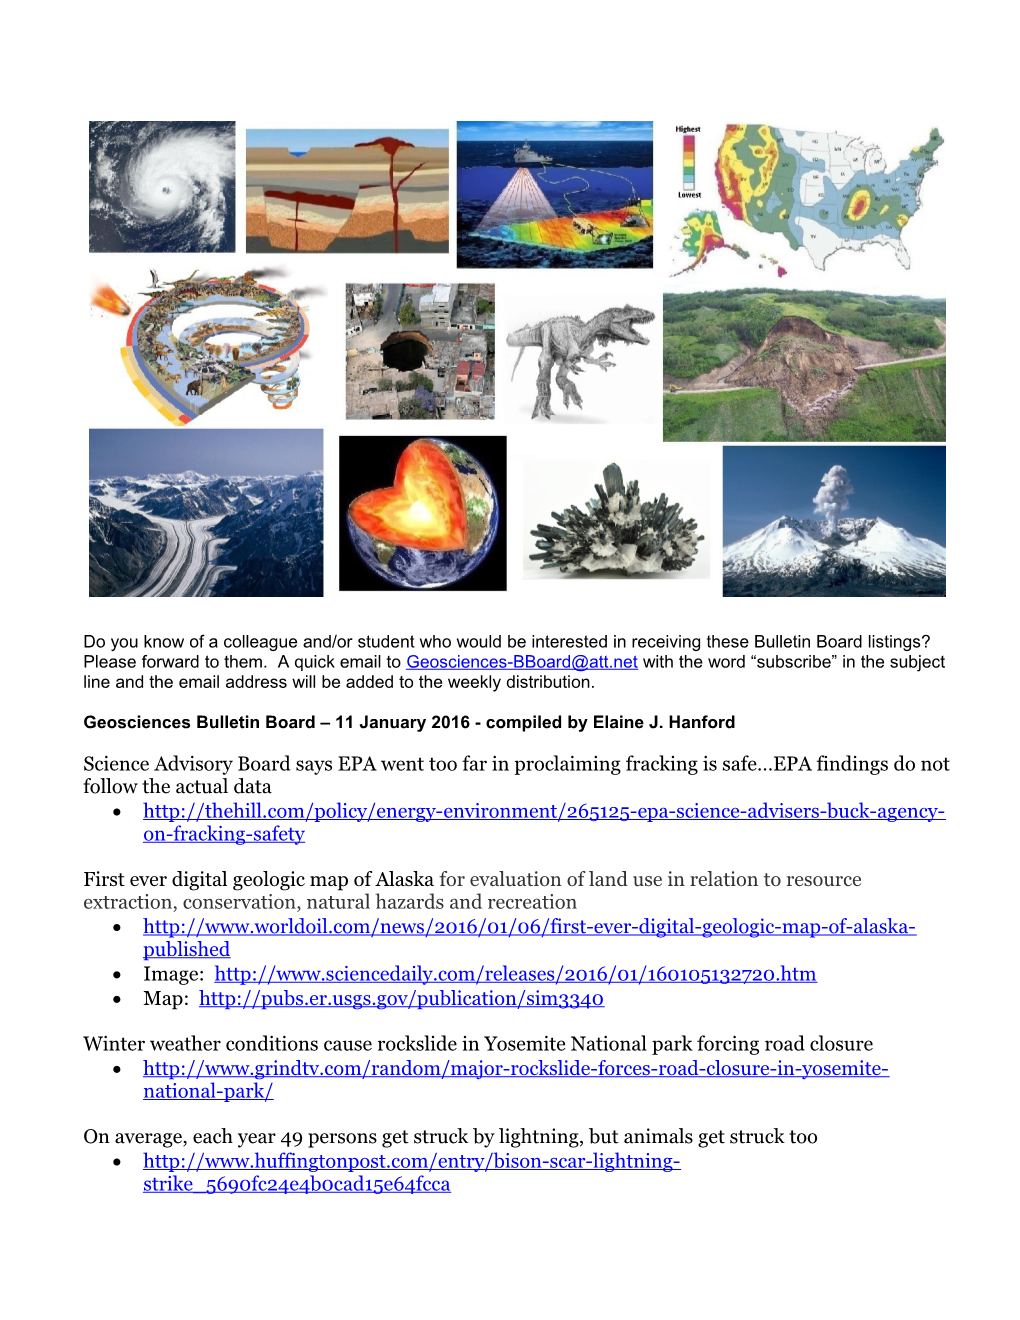 Geosciences Bulletin Board 11 January 2016- Compiled by Elaine J. Hanford